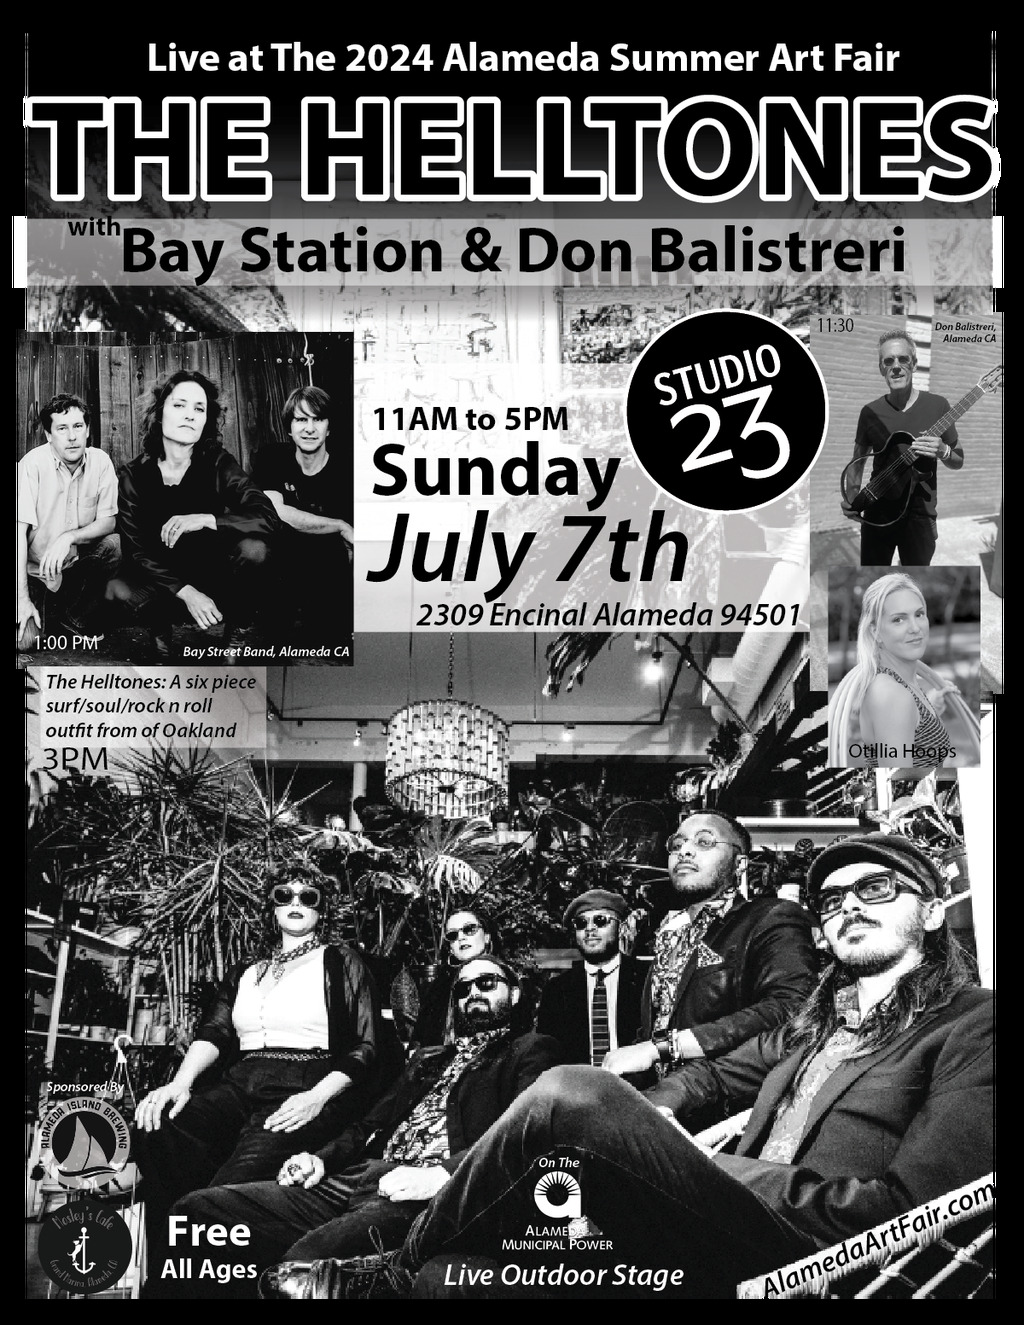 Studio 23 Gallery Rock the Day Away with The Helltones at Studio 23  promotion flier on Digifli com